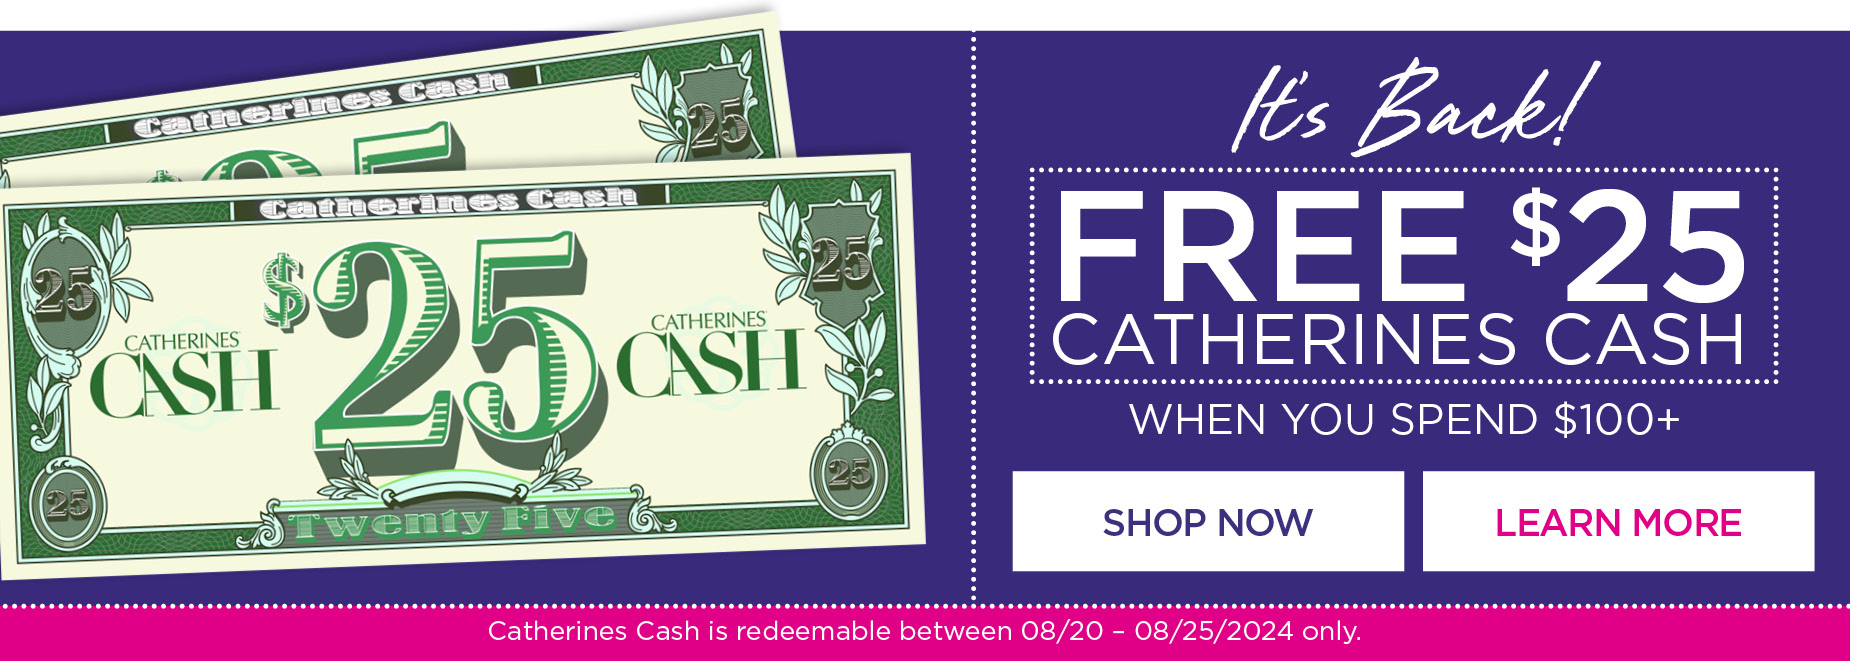 It's Back! Free $25 catherines Cash when you spend $100+! Redeemable between 8/20-8/25